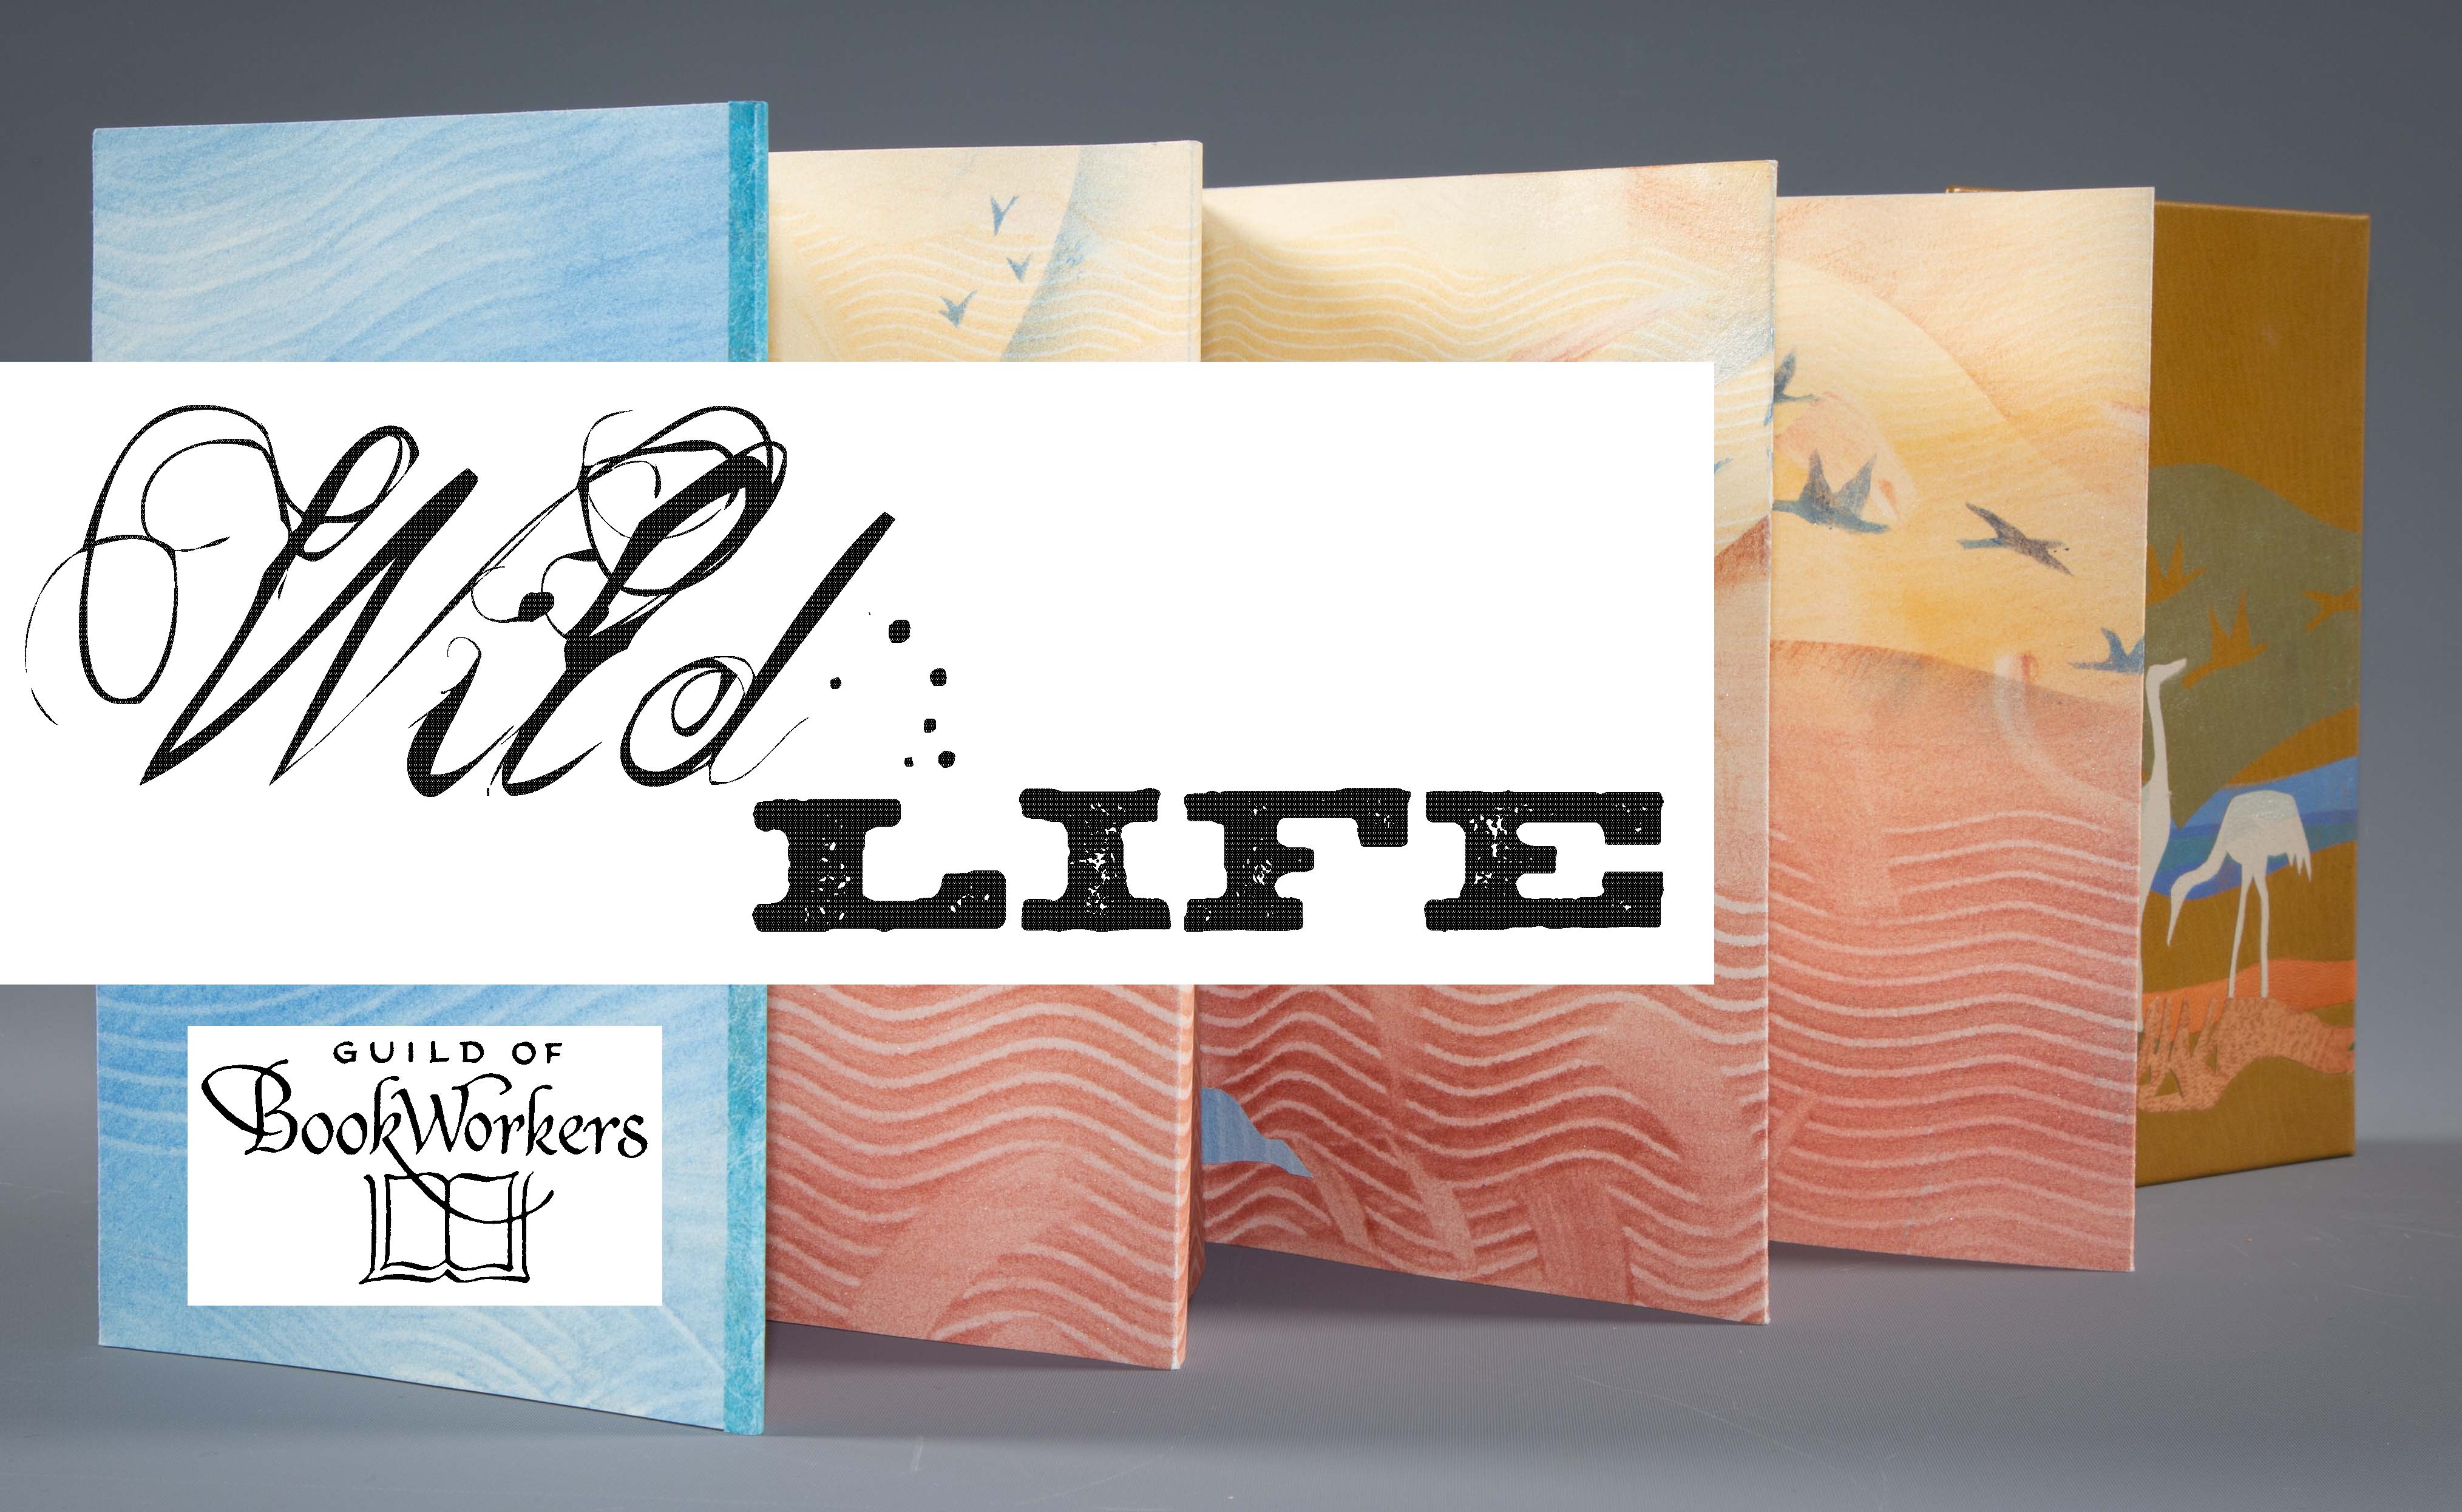 Black cursive lettering spells out WildLife on a white rectangle over an in image of an accordion book with graphics in salmon, blue, pastel yellow, and ocre colors. The book is Bosque by Priscilla Spitler